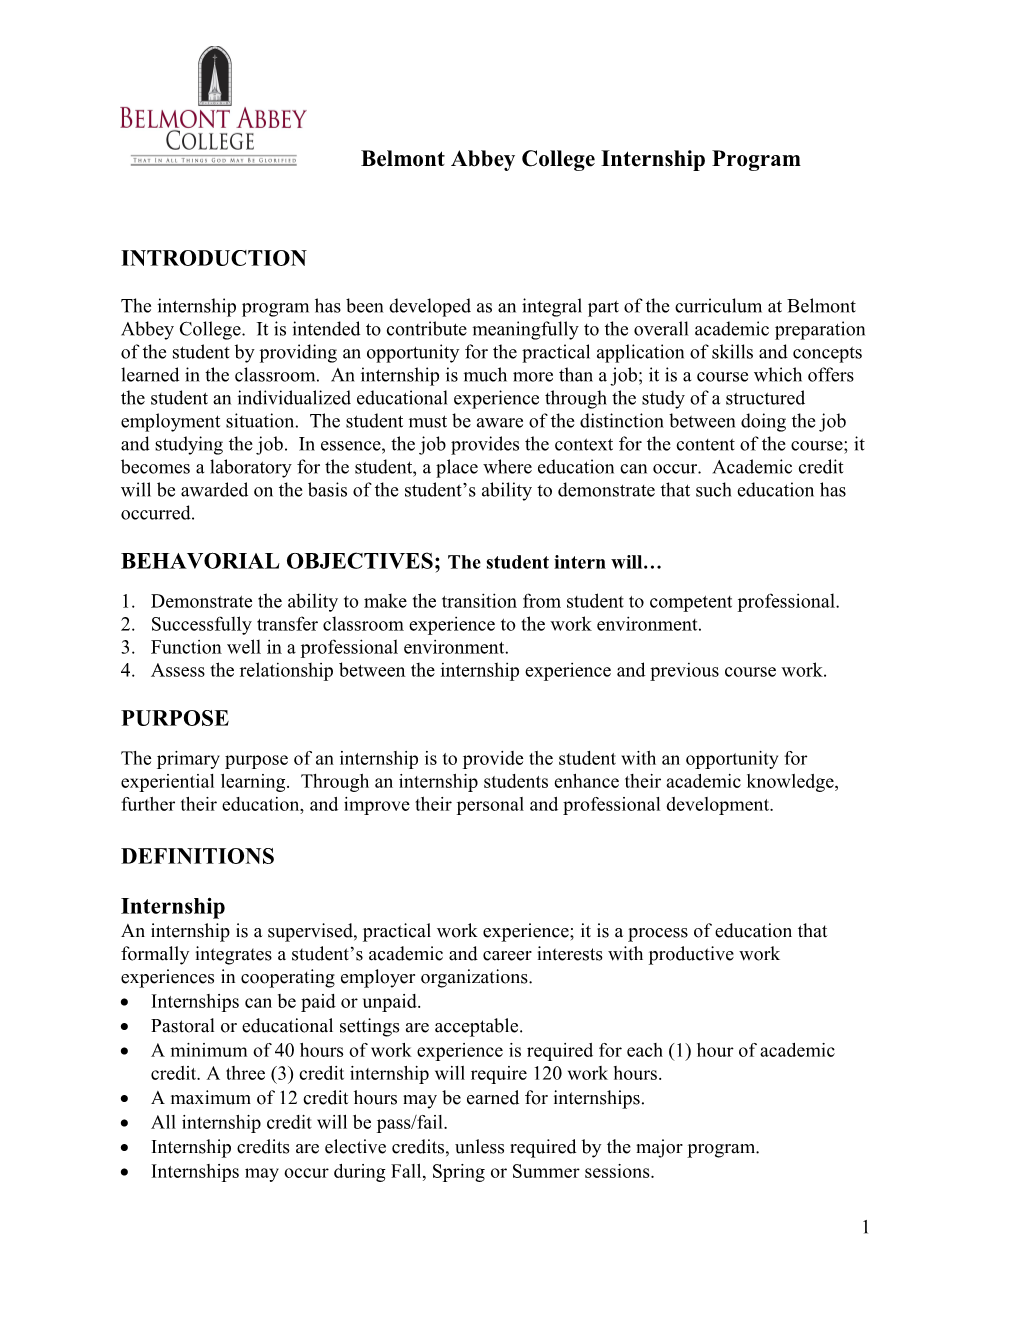 BEHAVORIAL OBJECTIVES; the Student Intern Will